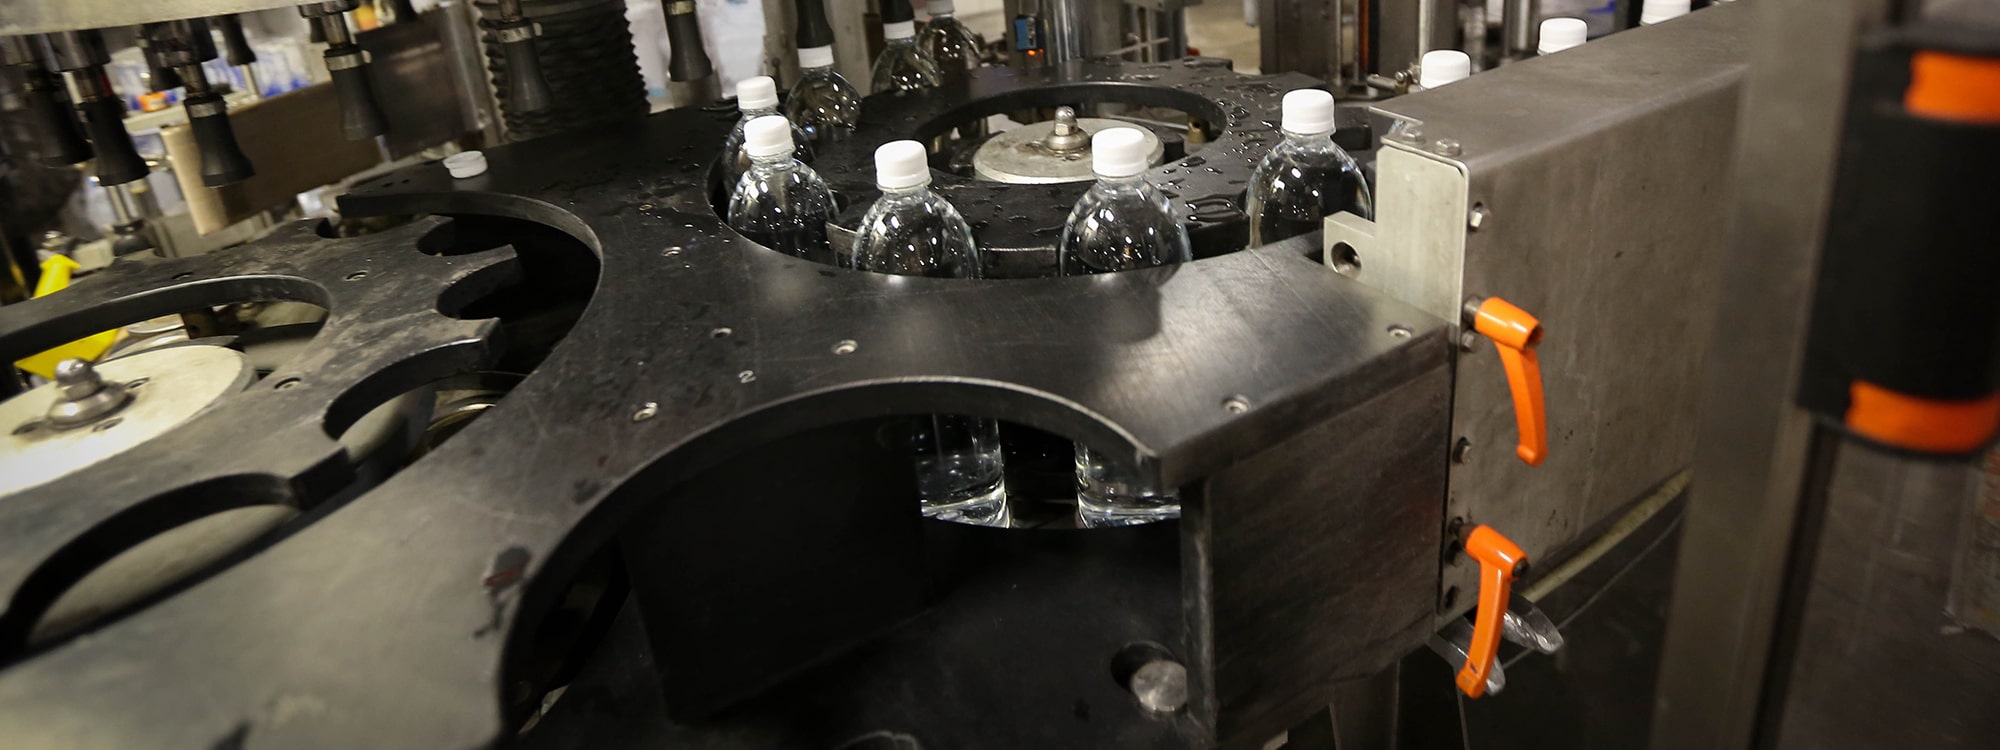 Private-label Water and Beverages - Contract Manufacturing and Co-Packing - Hero image - Mayer Brothers